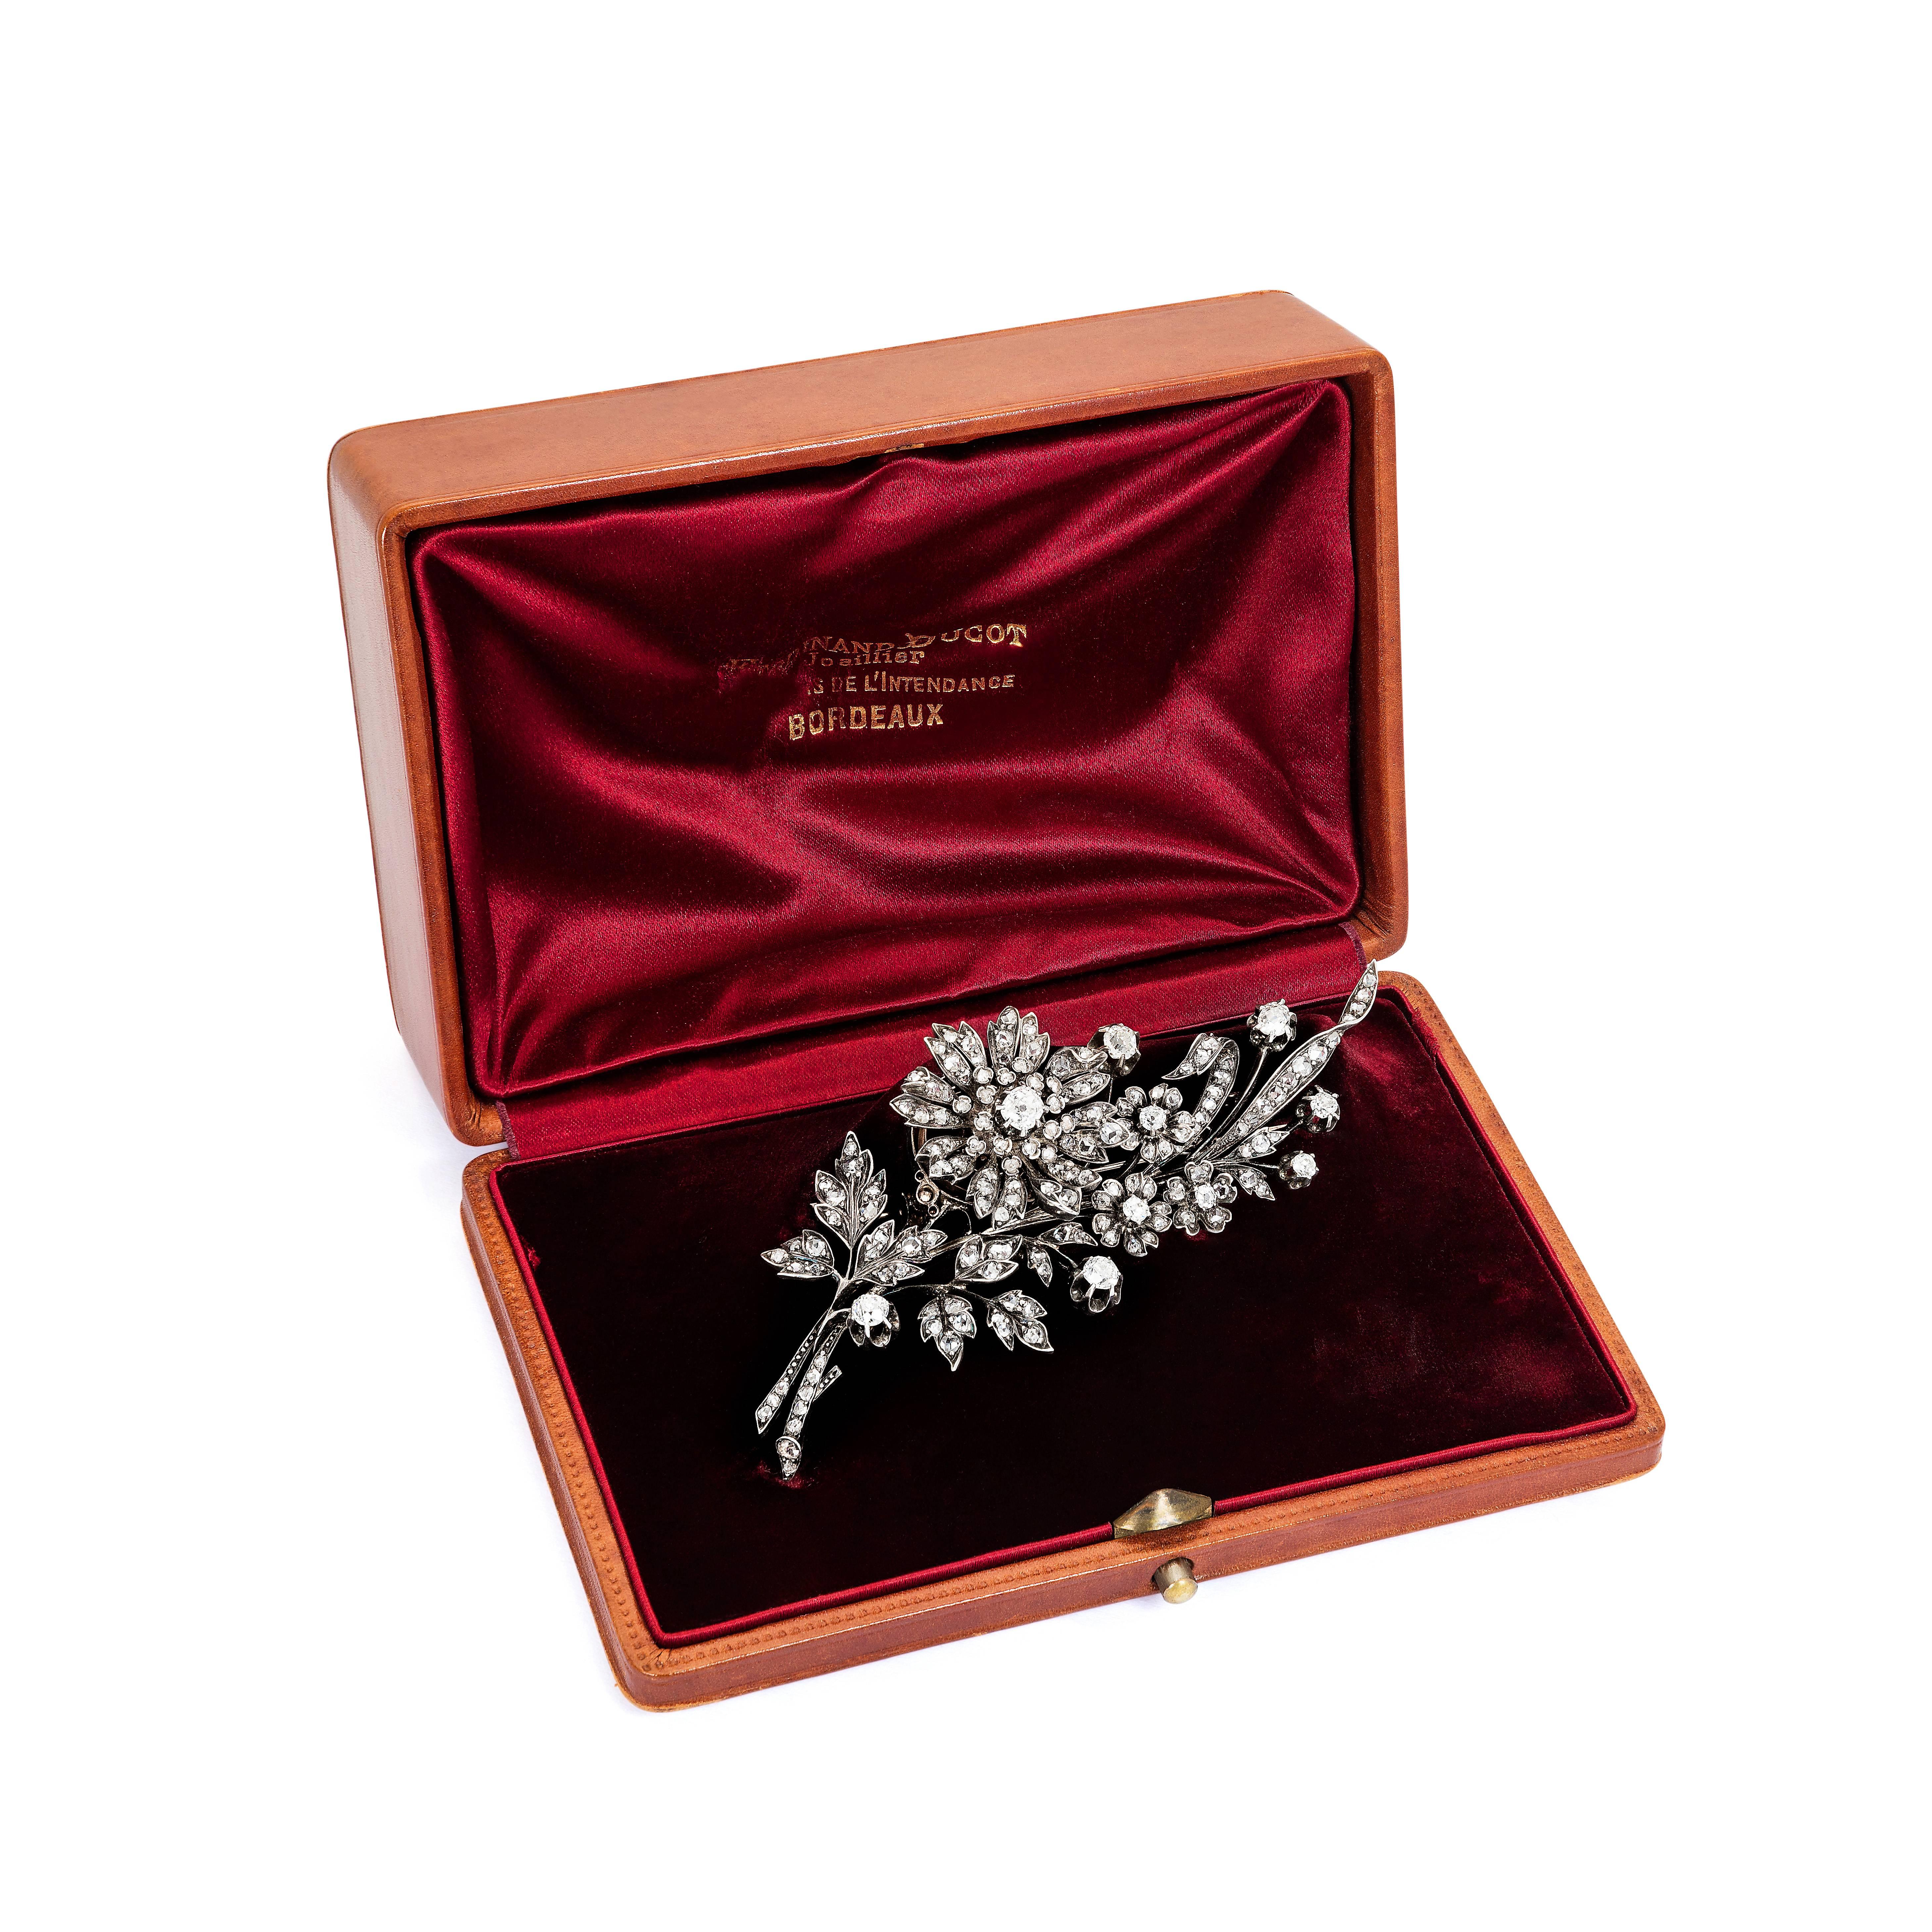 A Victorian diamond floral brooch. The elegant floral spray is animated by a ‘en tremblant’ setting for the largest flower in the centre. Small rose-cut diamonds surround larger round-cut cushion diamonds. The stones are set in silver on a gold